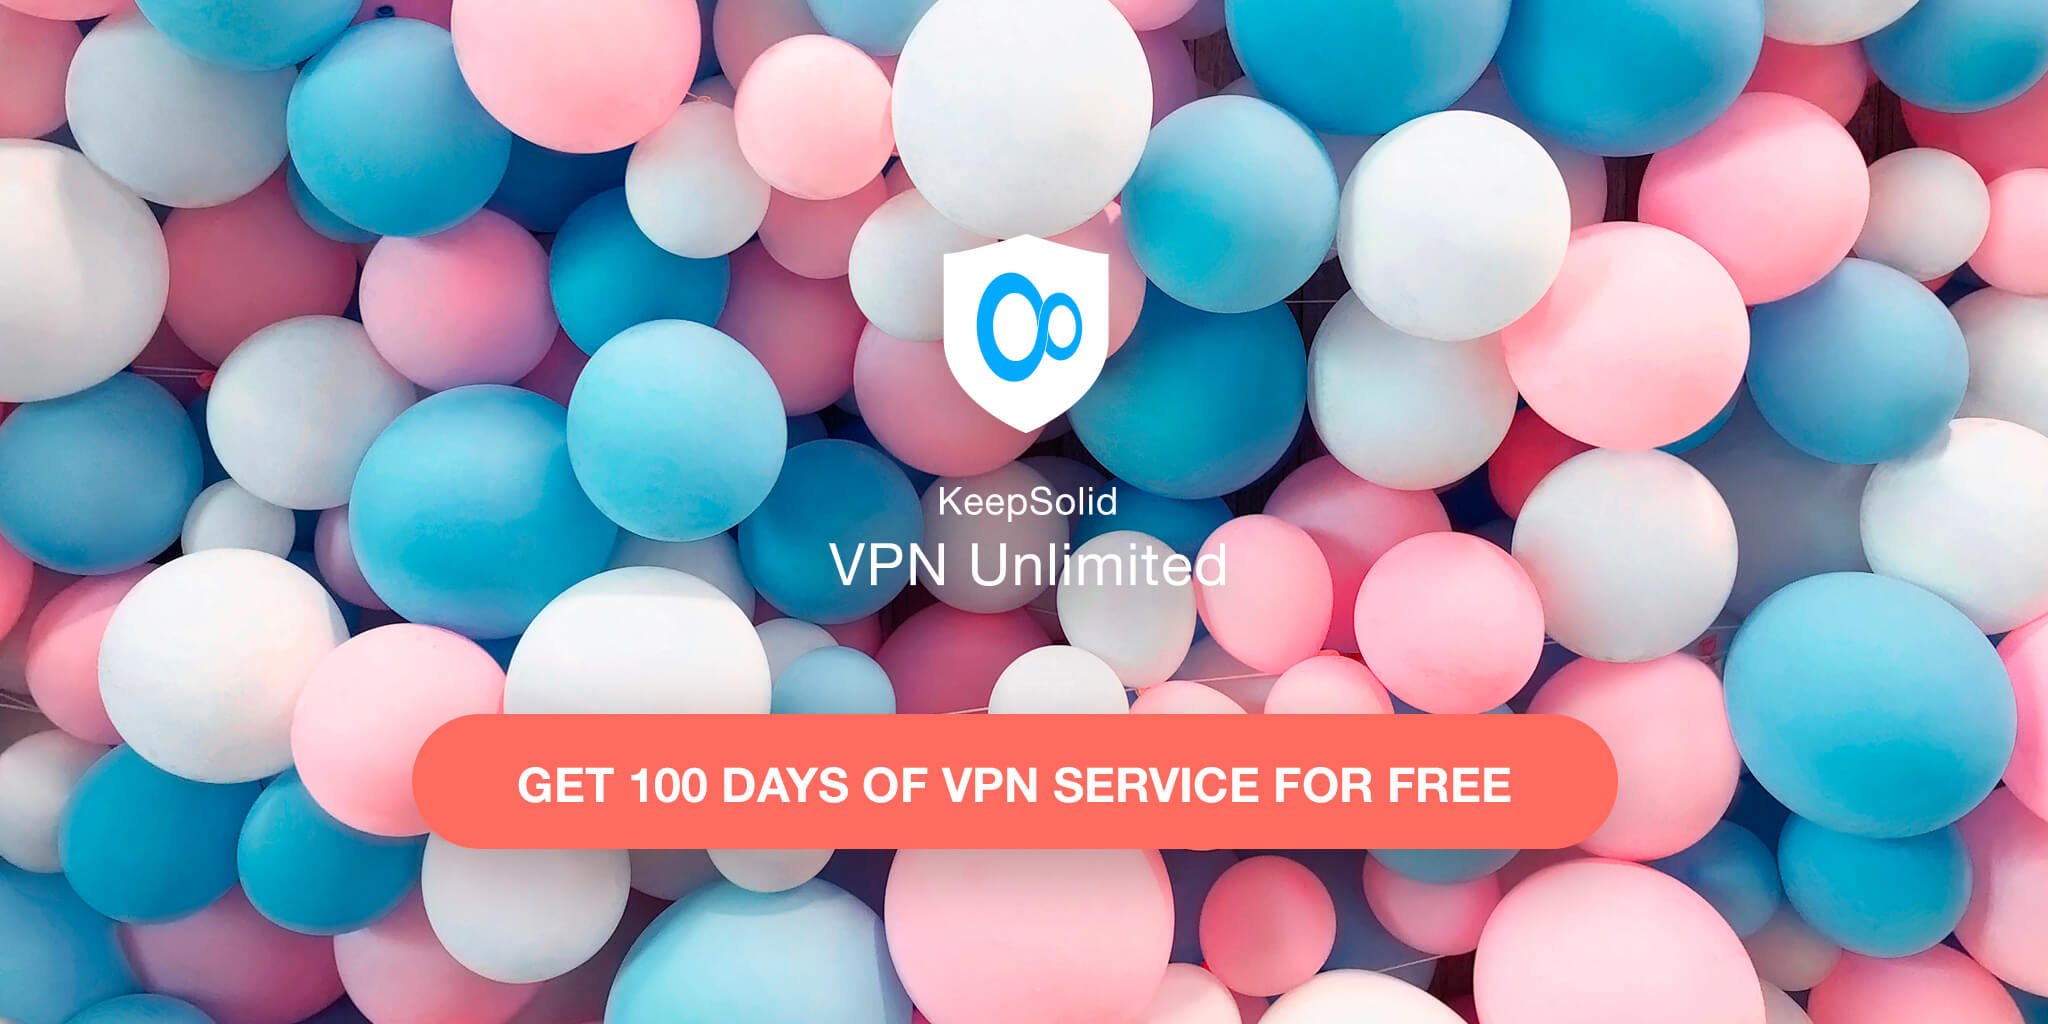 Get 100 days of VPN service for FREE